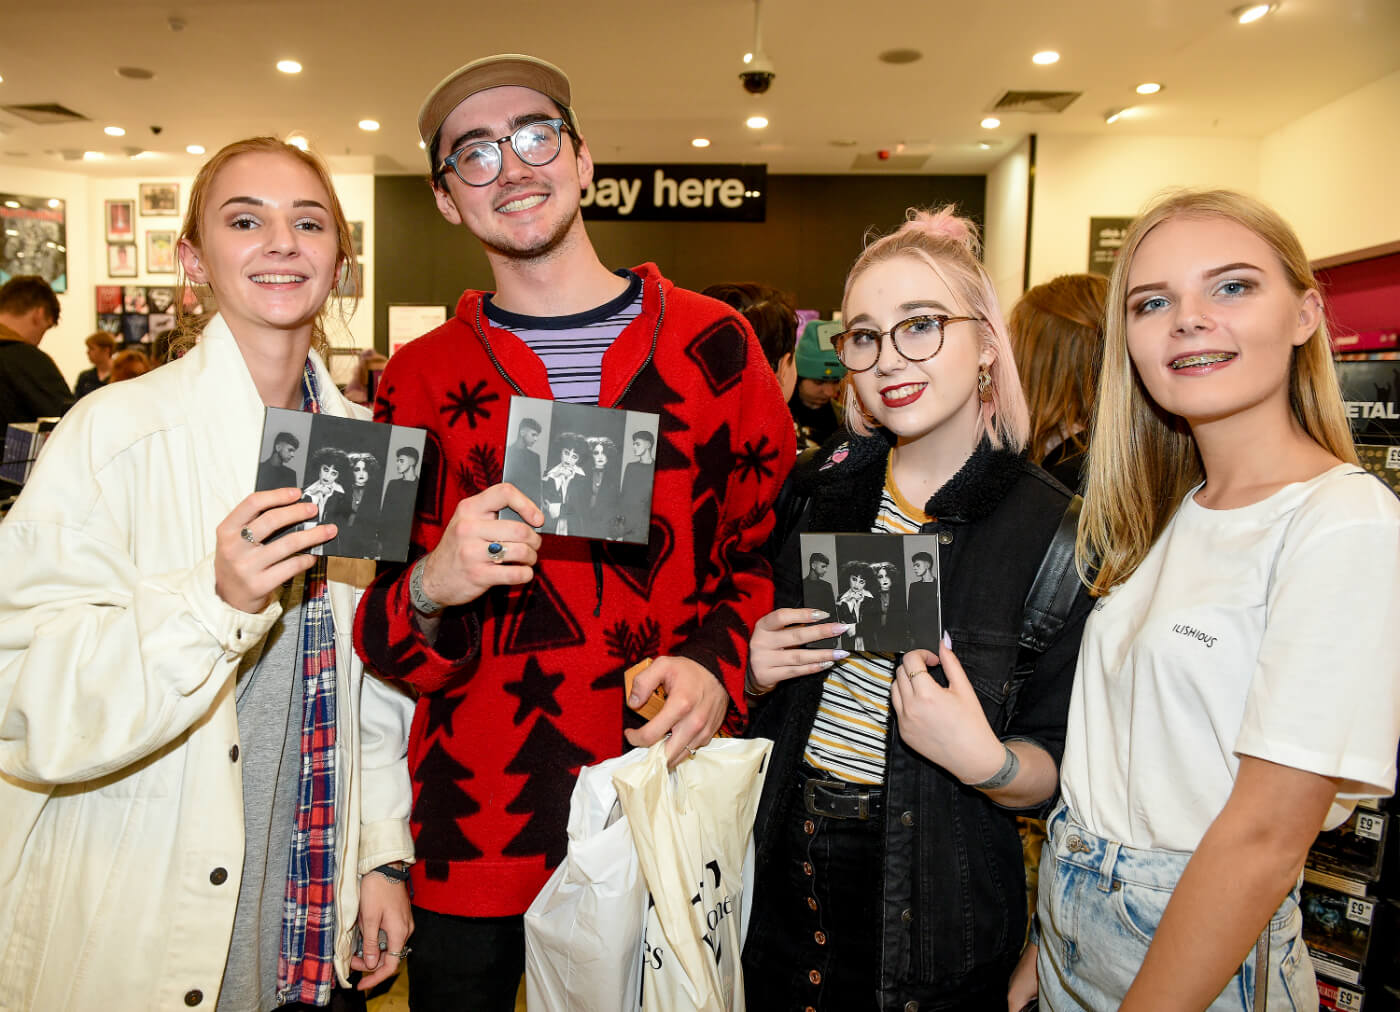 Manchester quartet Pale Waves signing copies of their new album My Mind Makes Noises and performing at HMV Manchester - image courtesy Shirlaine Forrest